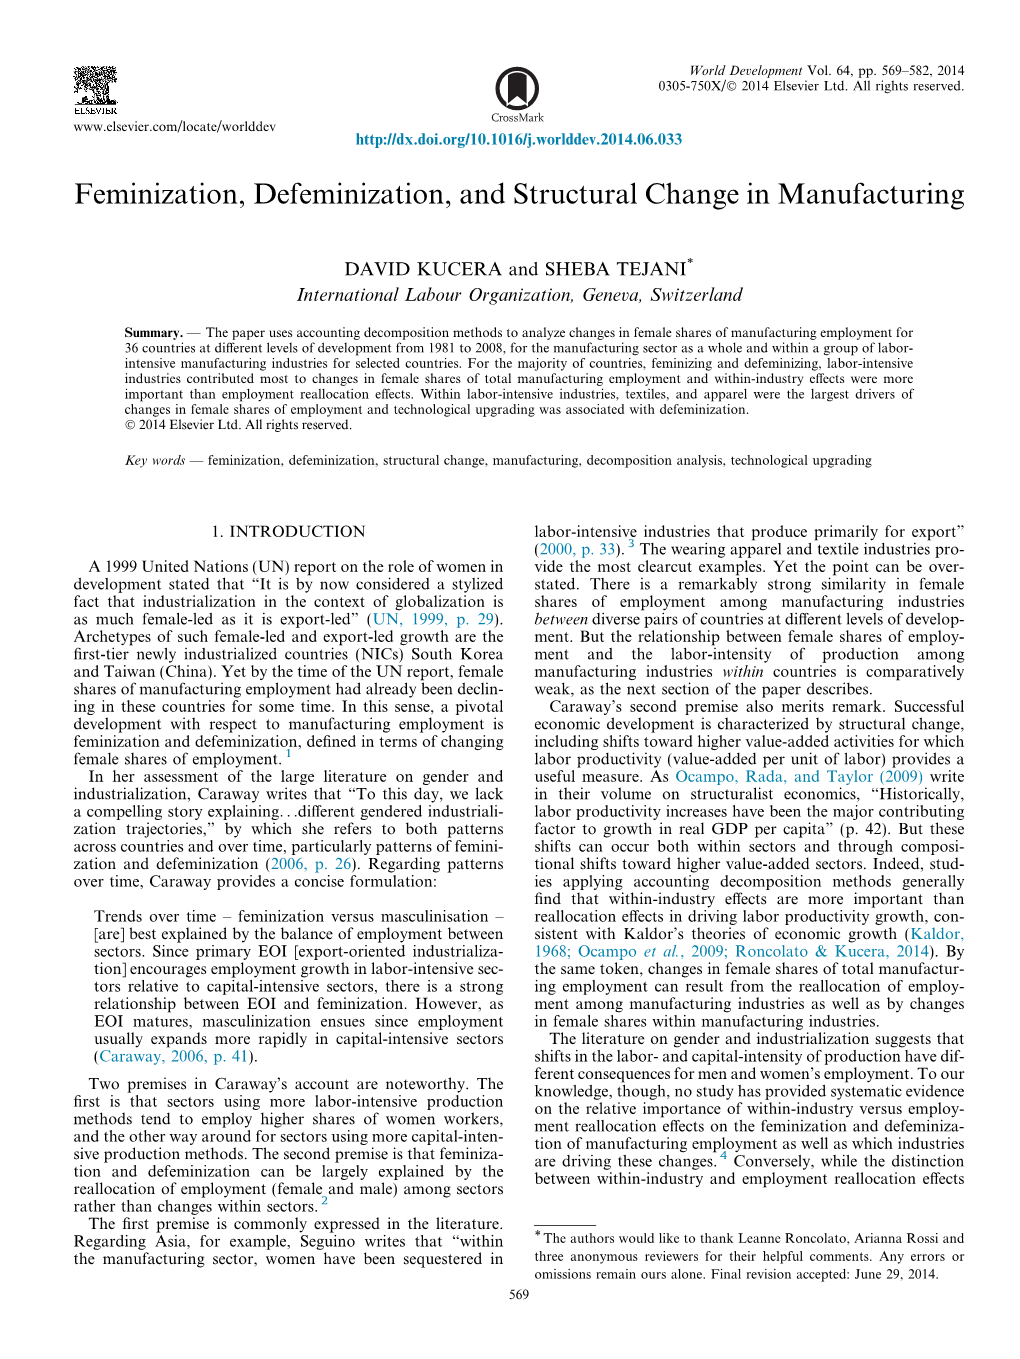 Feminization, Defeminization, and Structural Change in Manufacturing